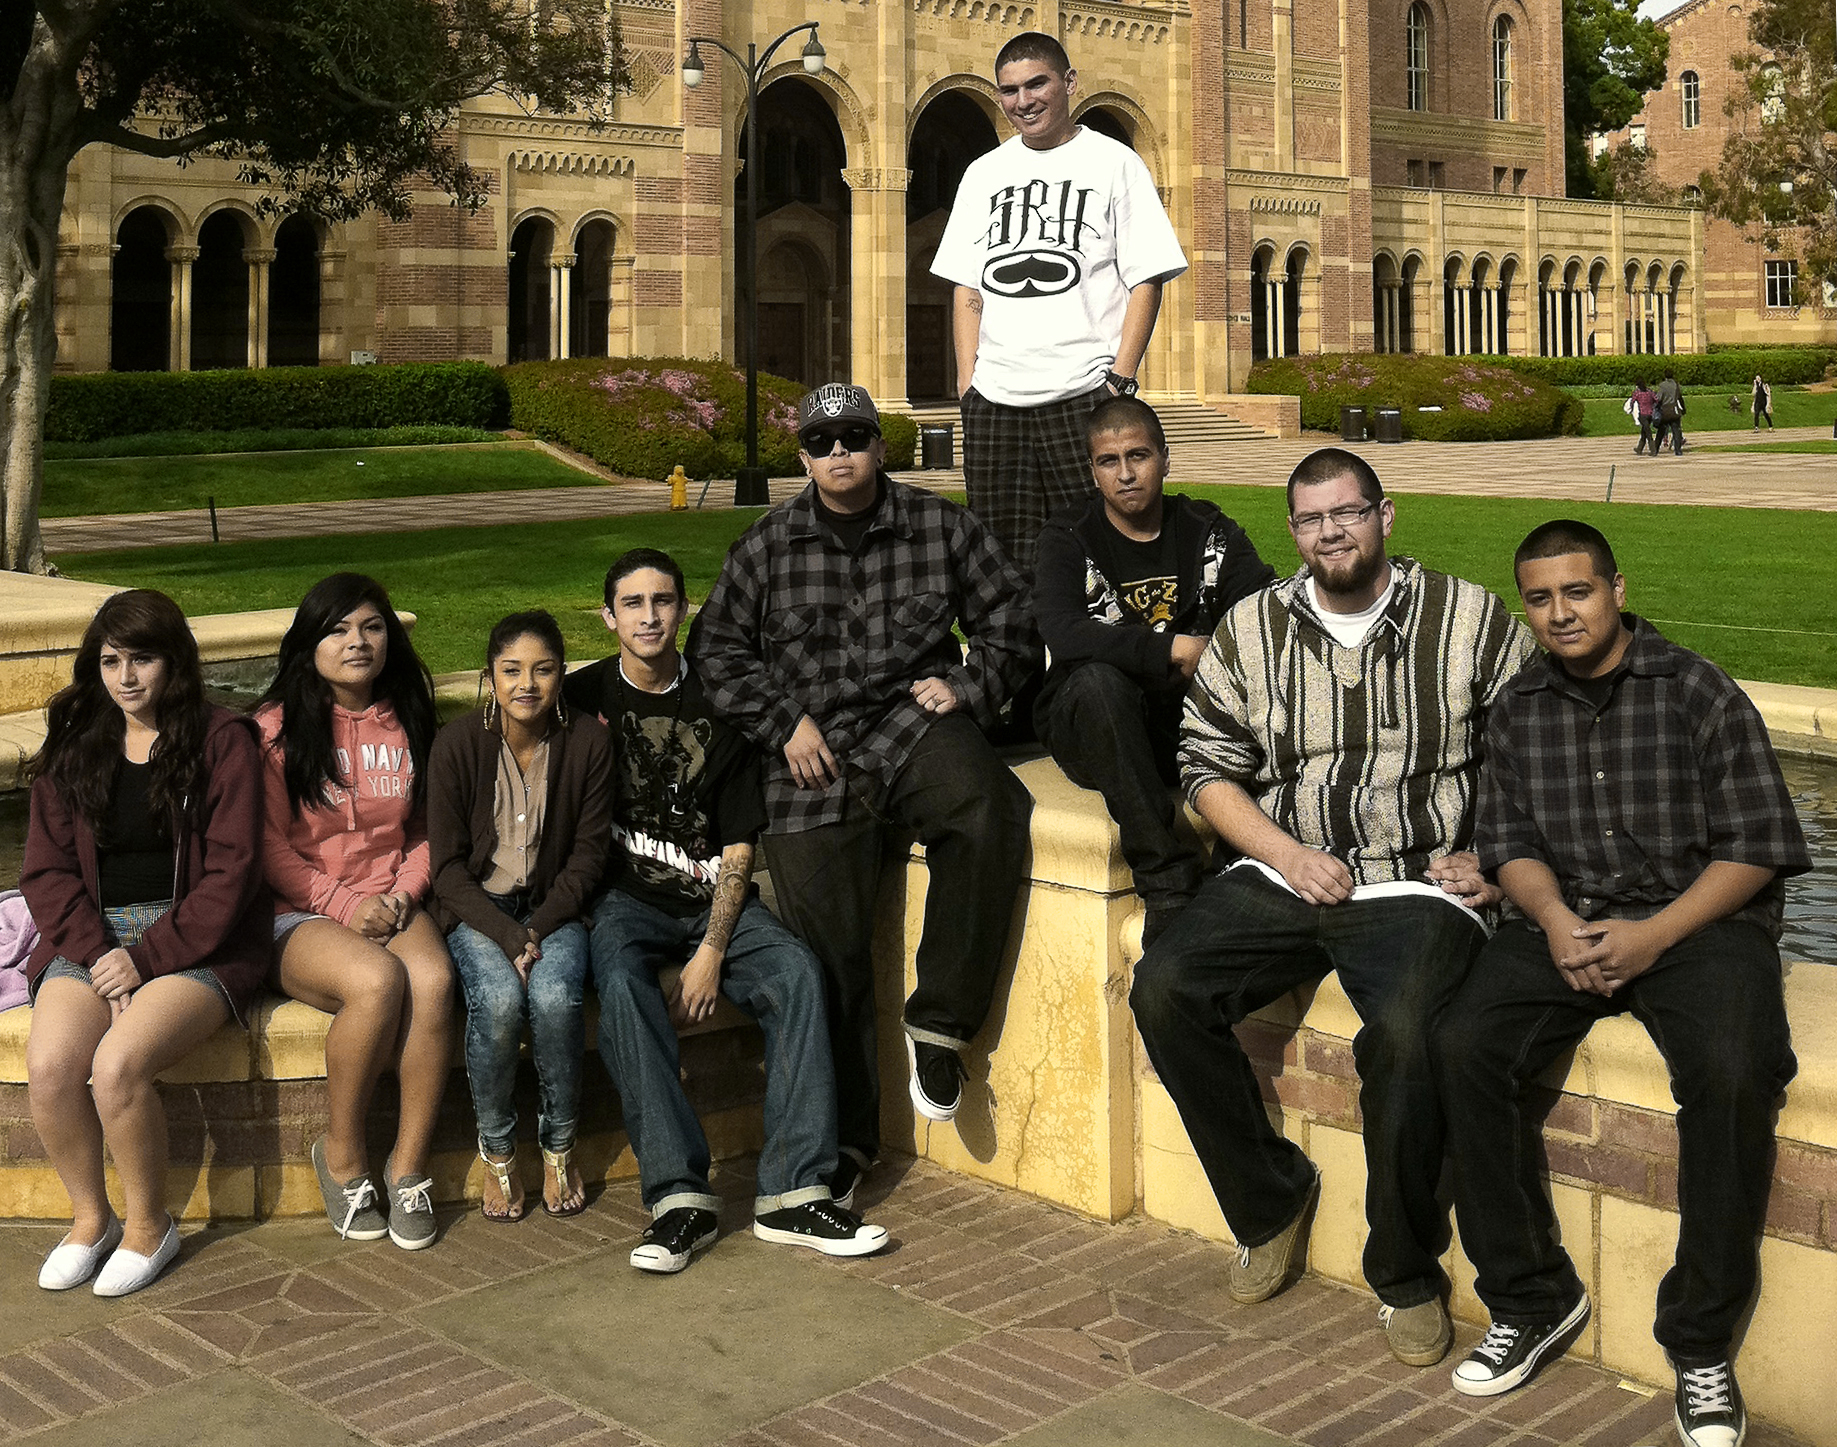 Youth Violence Prevention Project: the group together